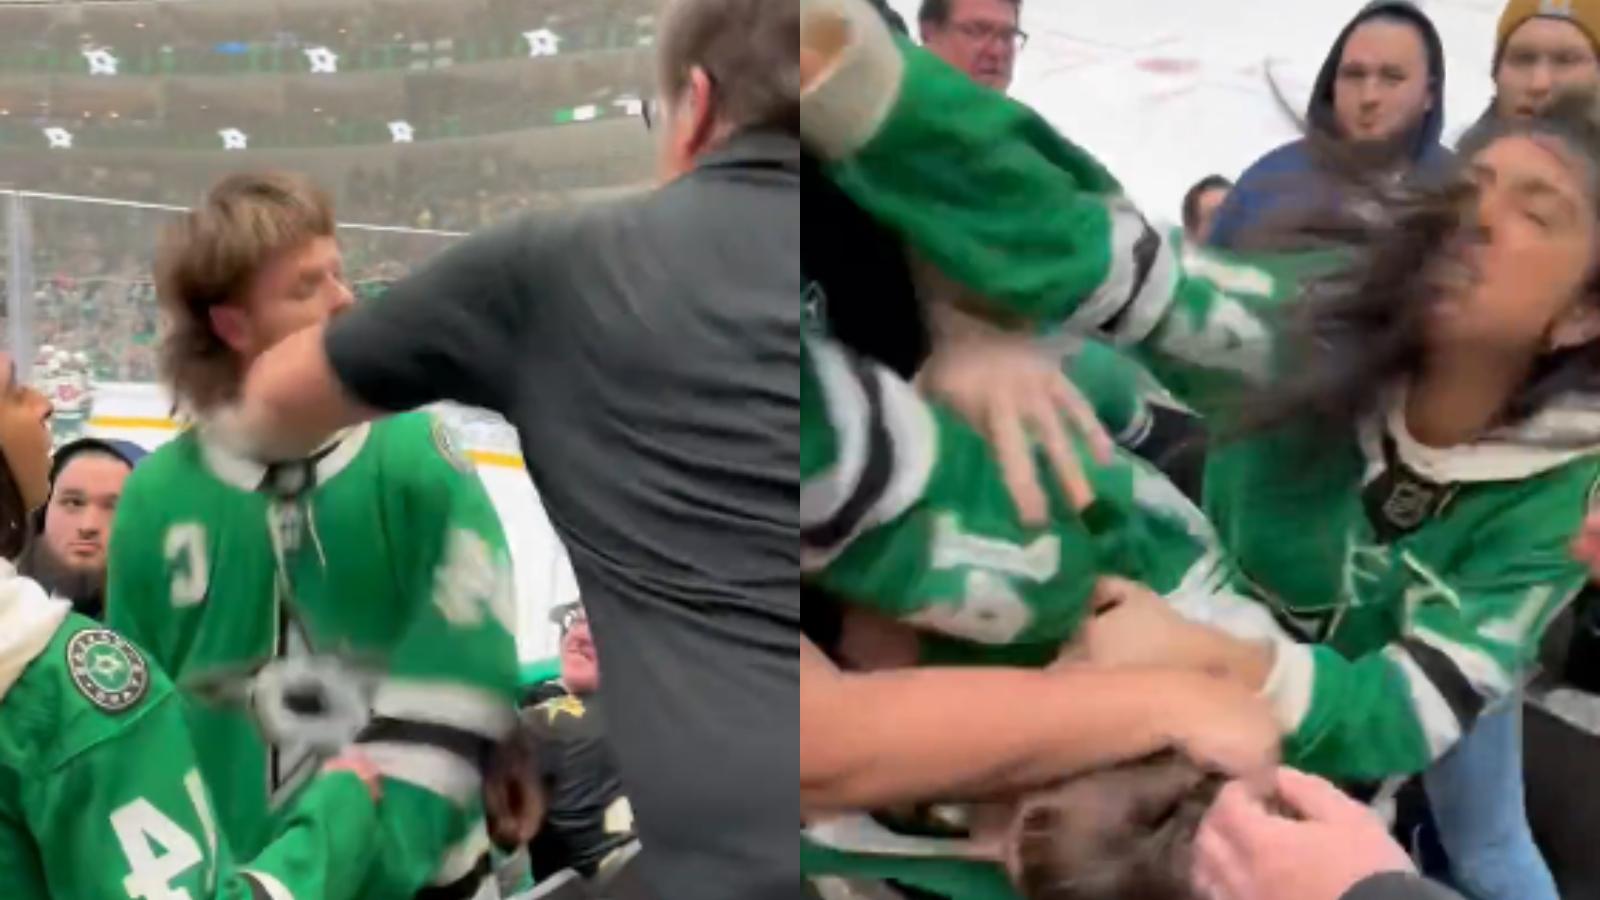 dallas stars fan gets knocked out by rival in viral fight